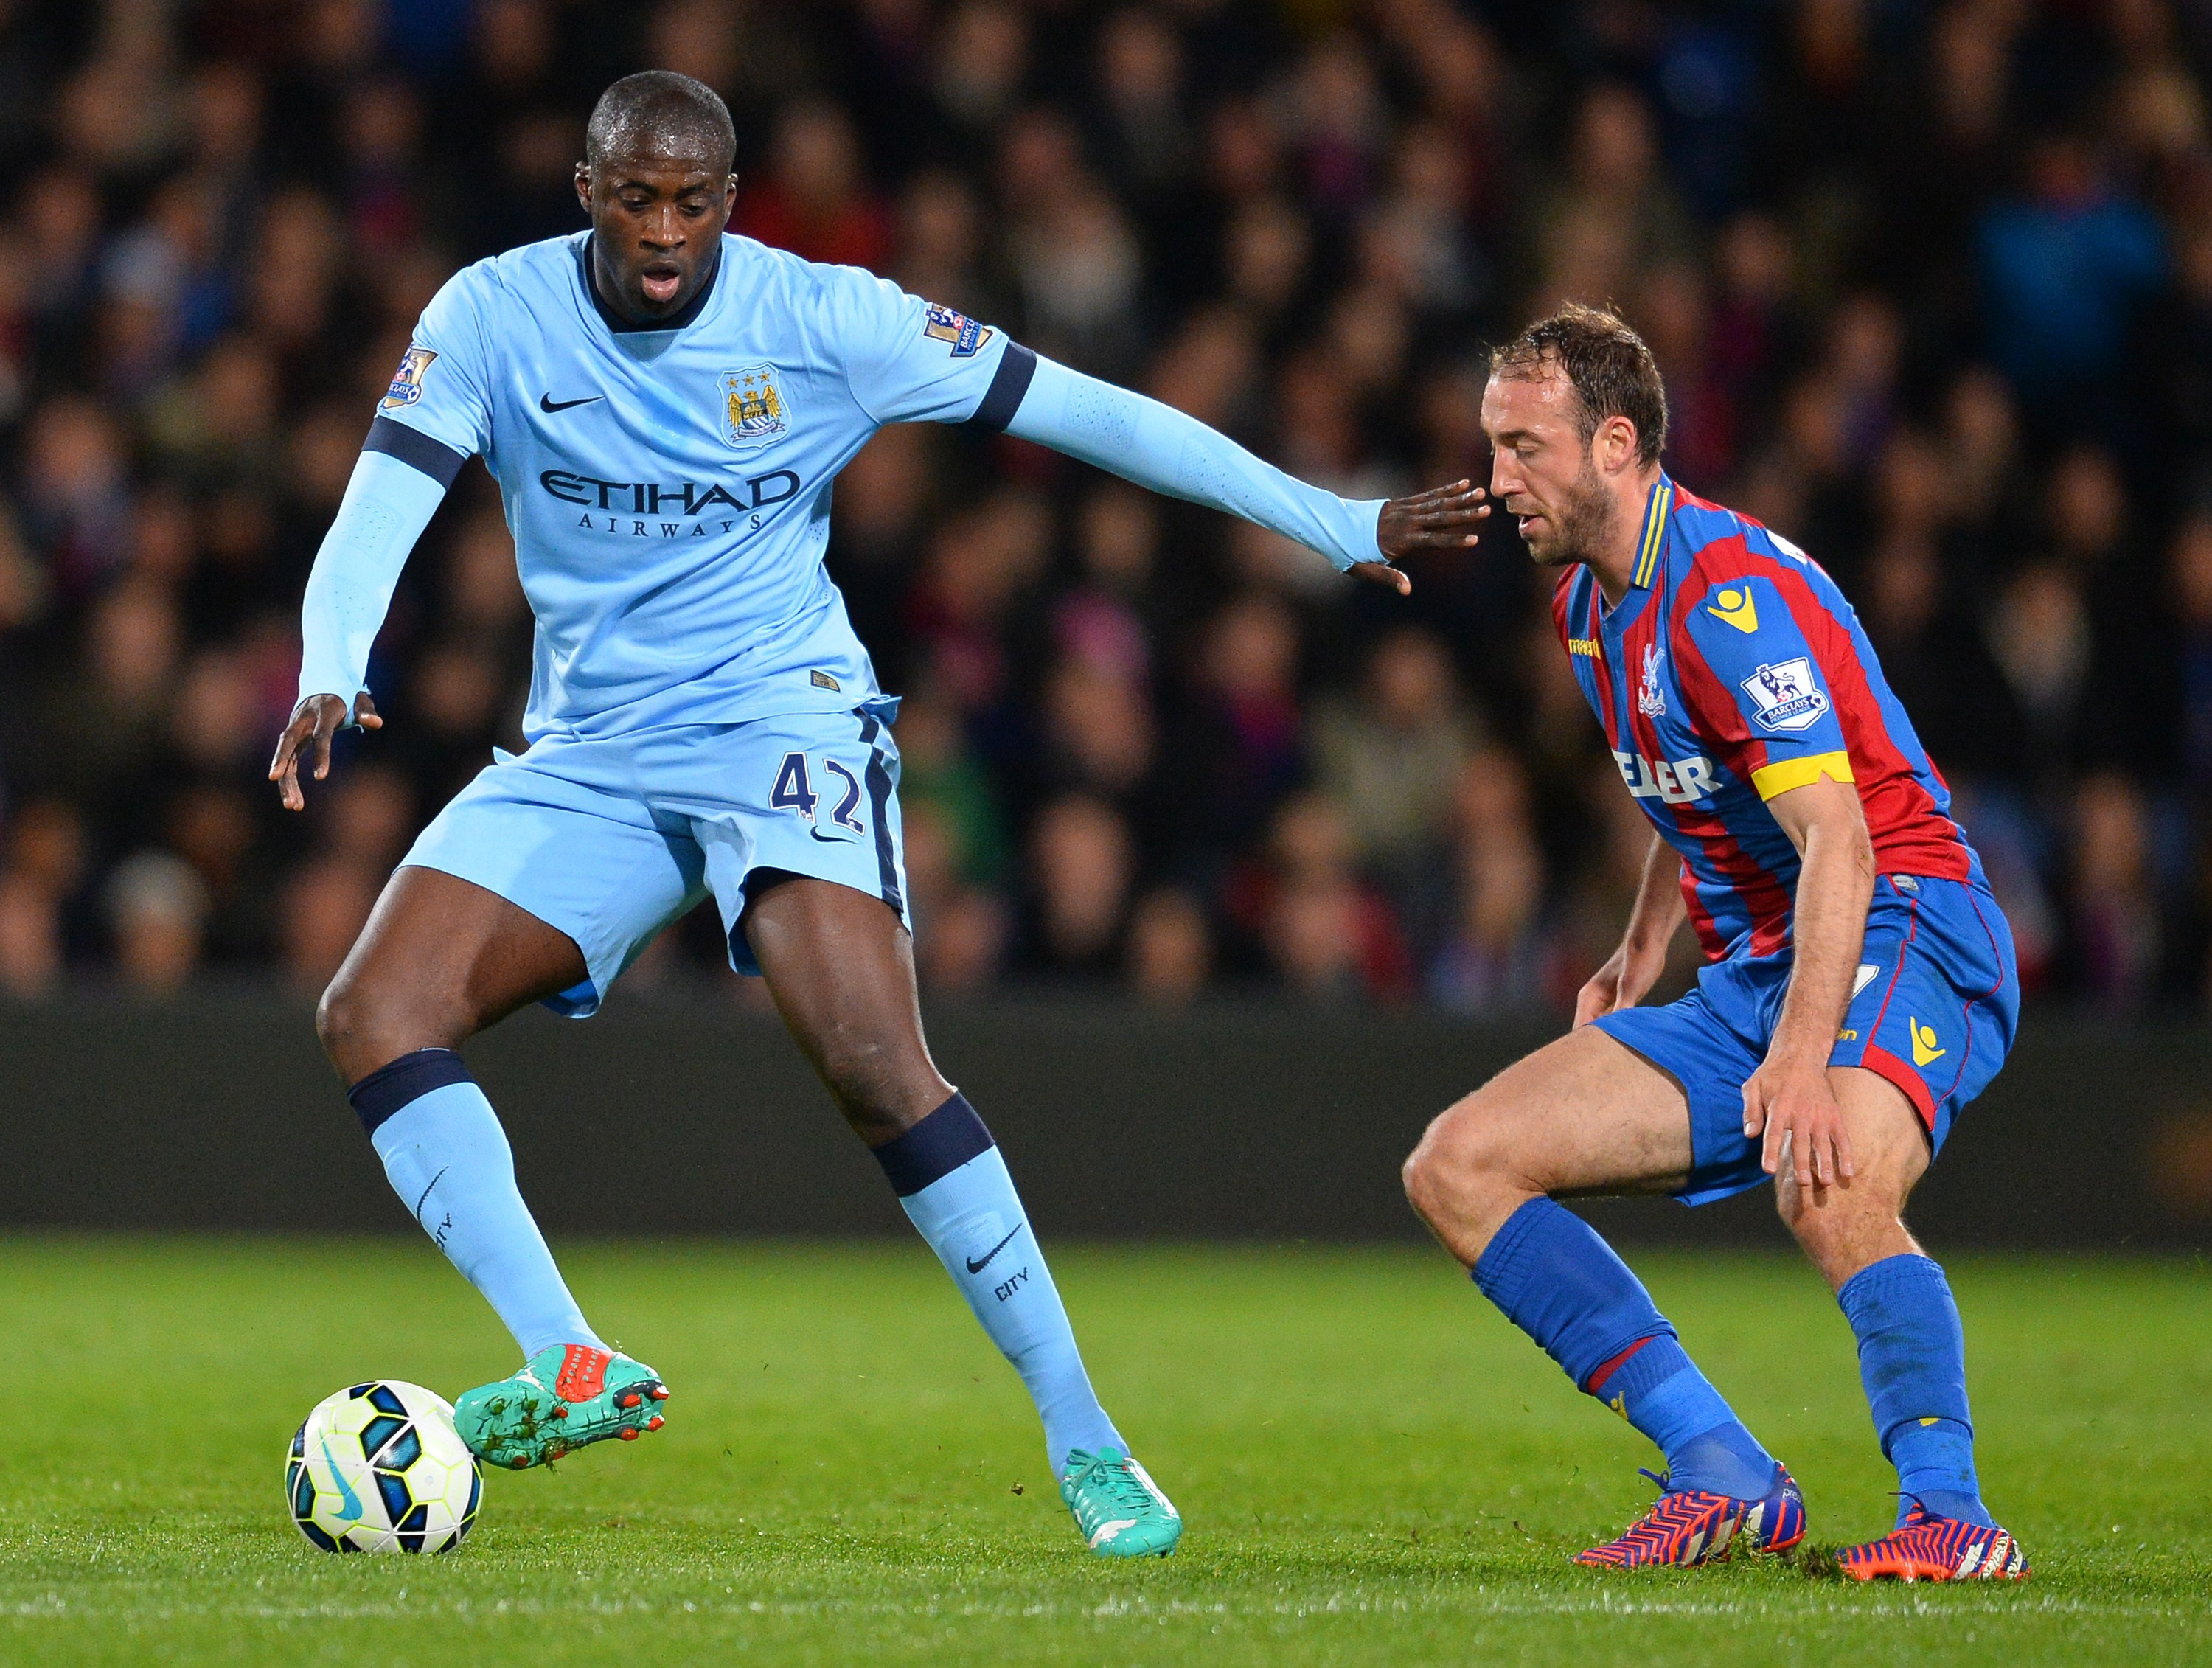 CdS – Yaya Touré has accepted Inter’s offer